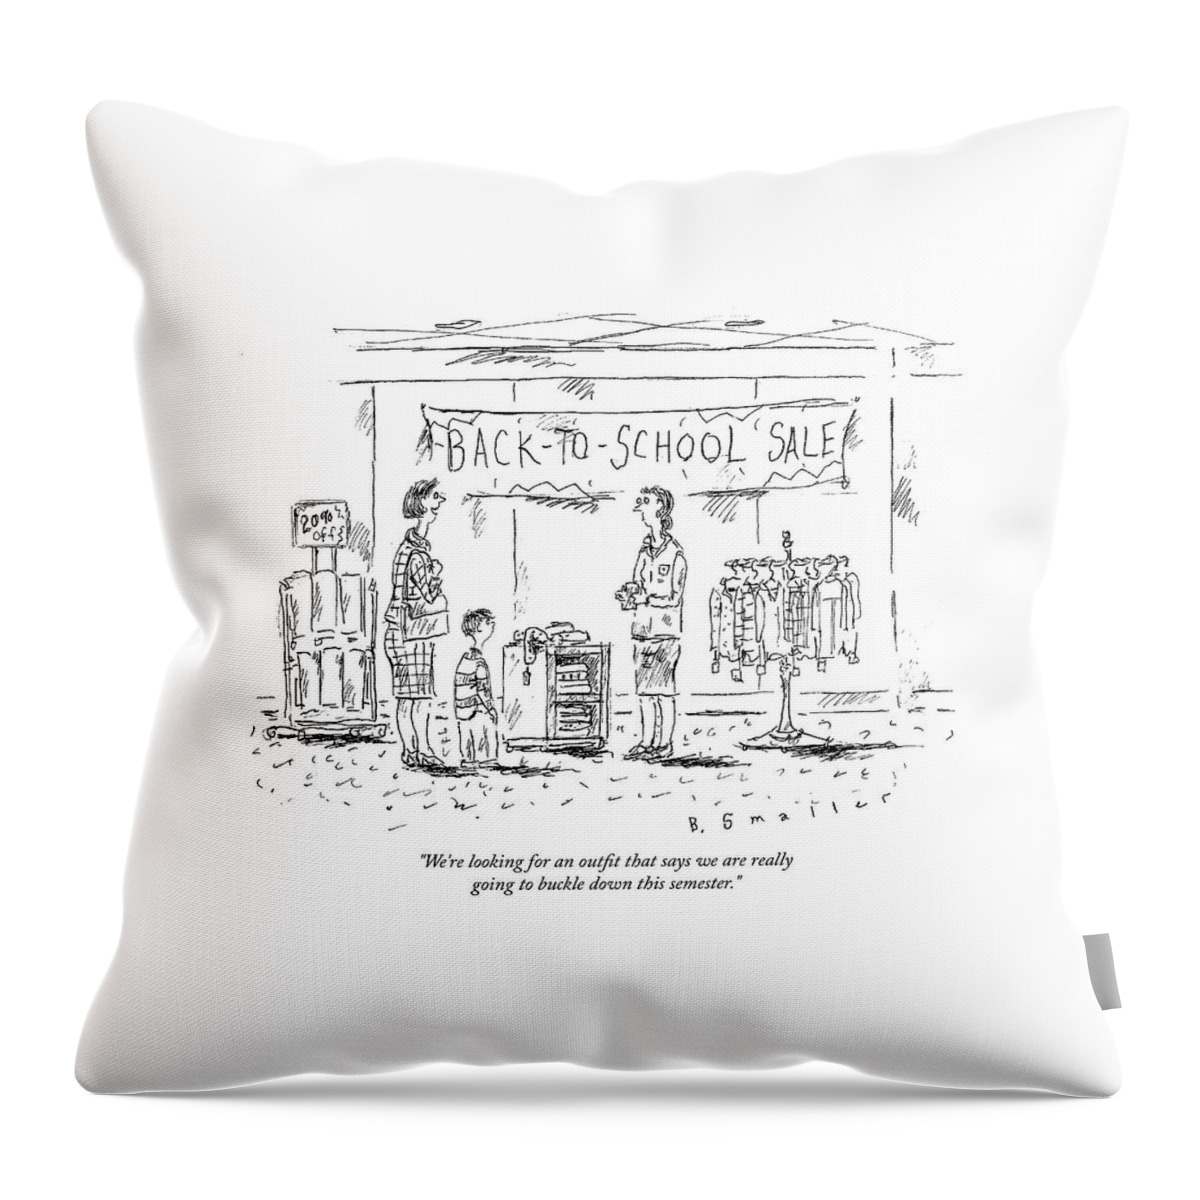 Back-to-school-sale Throw Pillow